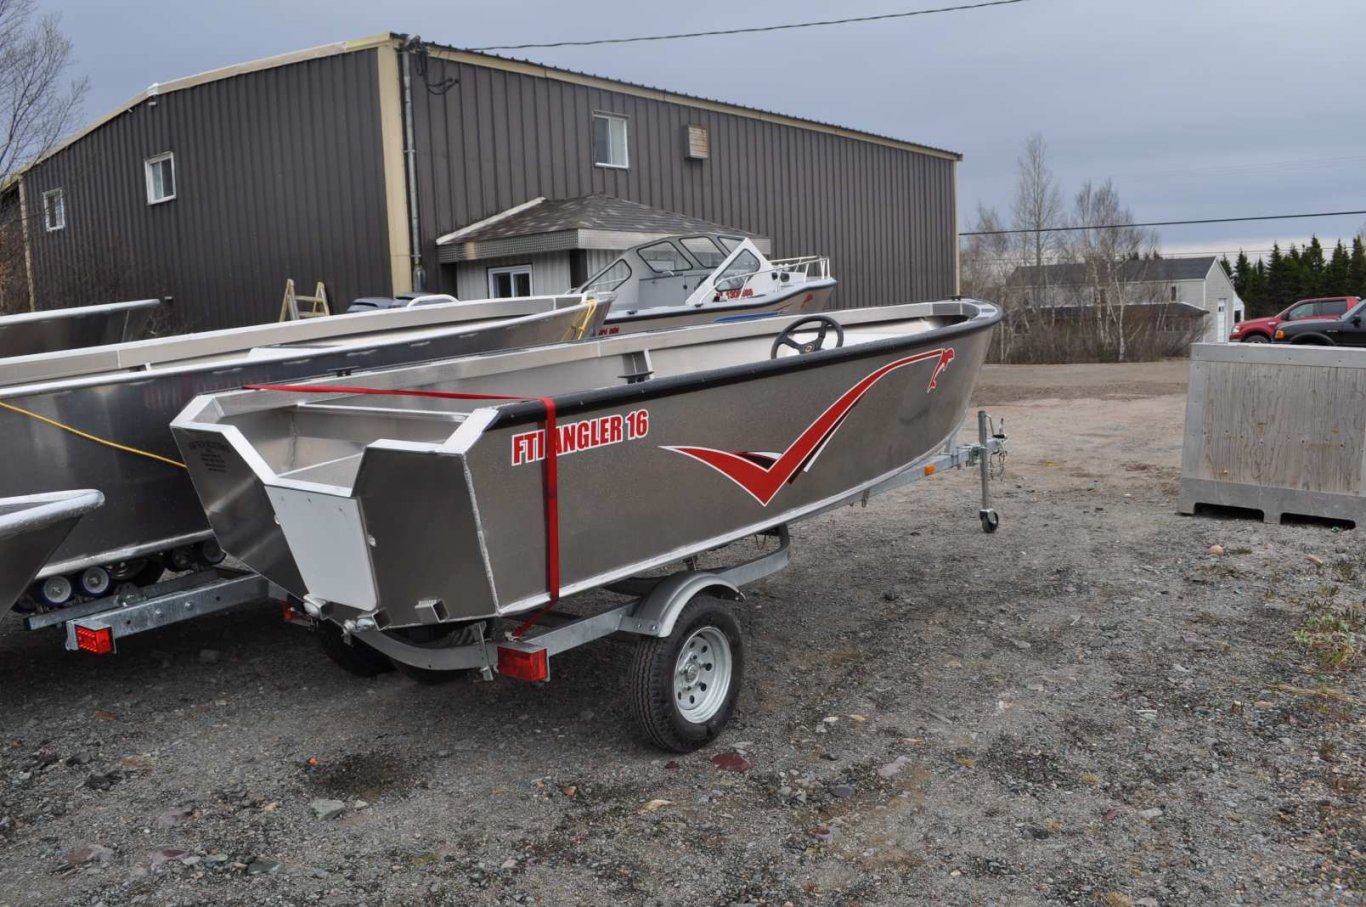 http://fab-tech.ca/wp-content/uploads/2022/06/angler-16_Side-Steering-Console.jpg